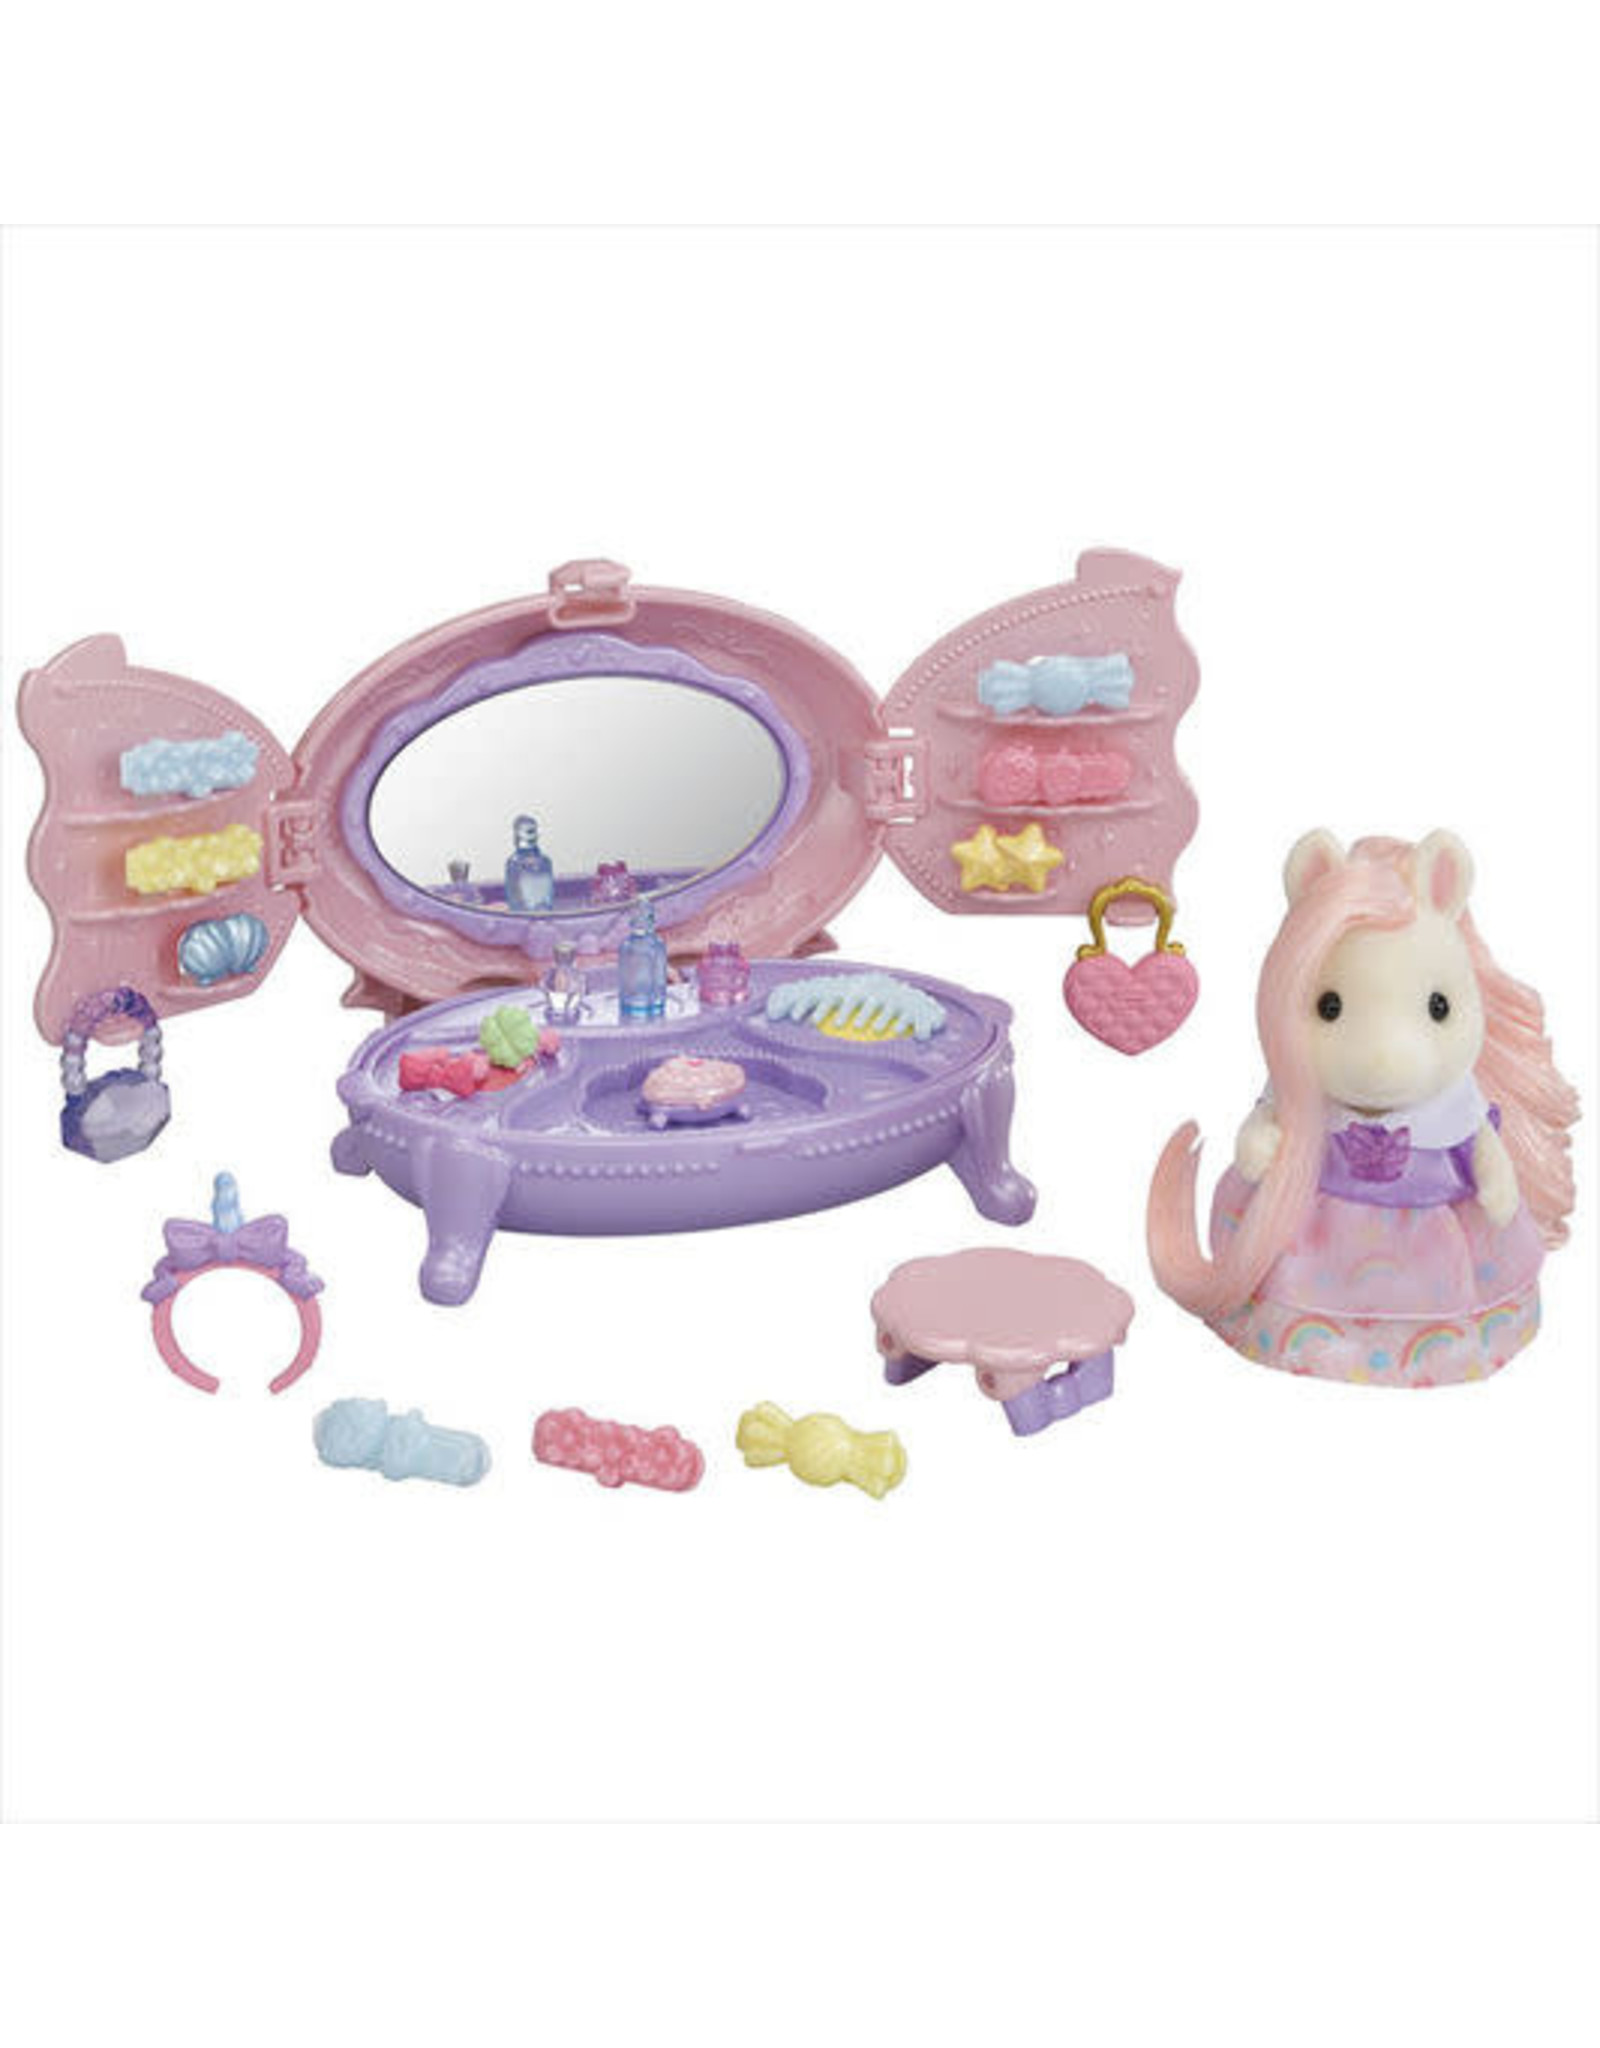 Calico Critters Calico Critters, Pony's Vanity Dresser Set